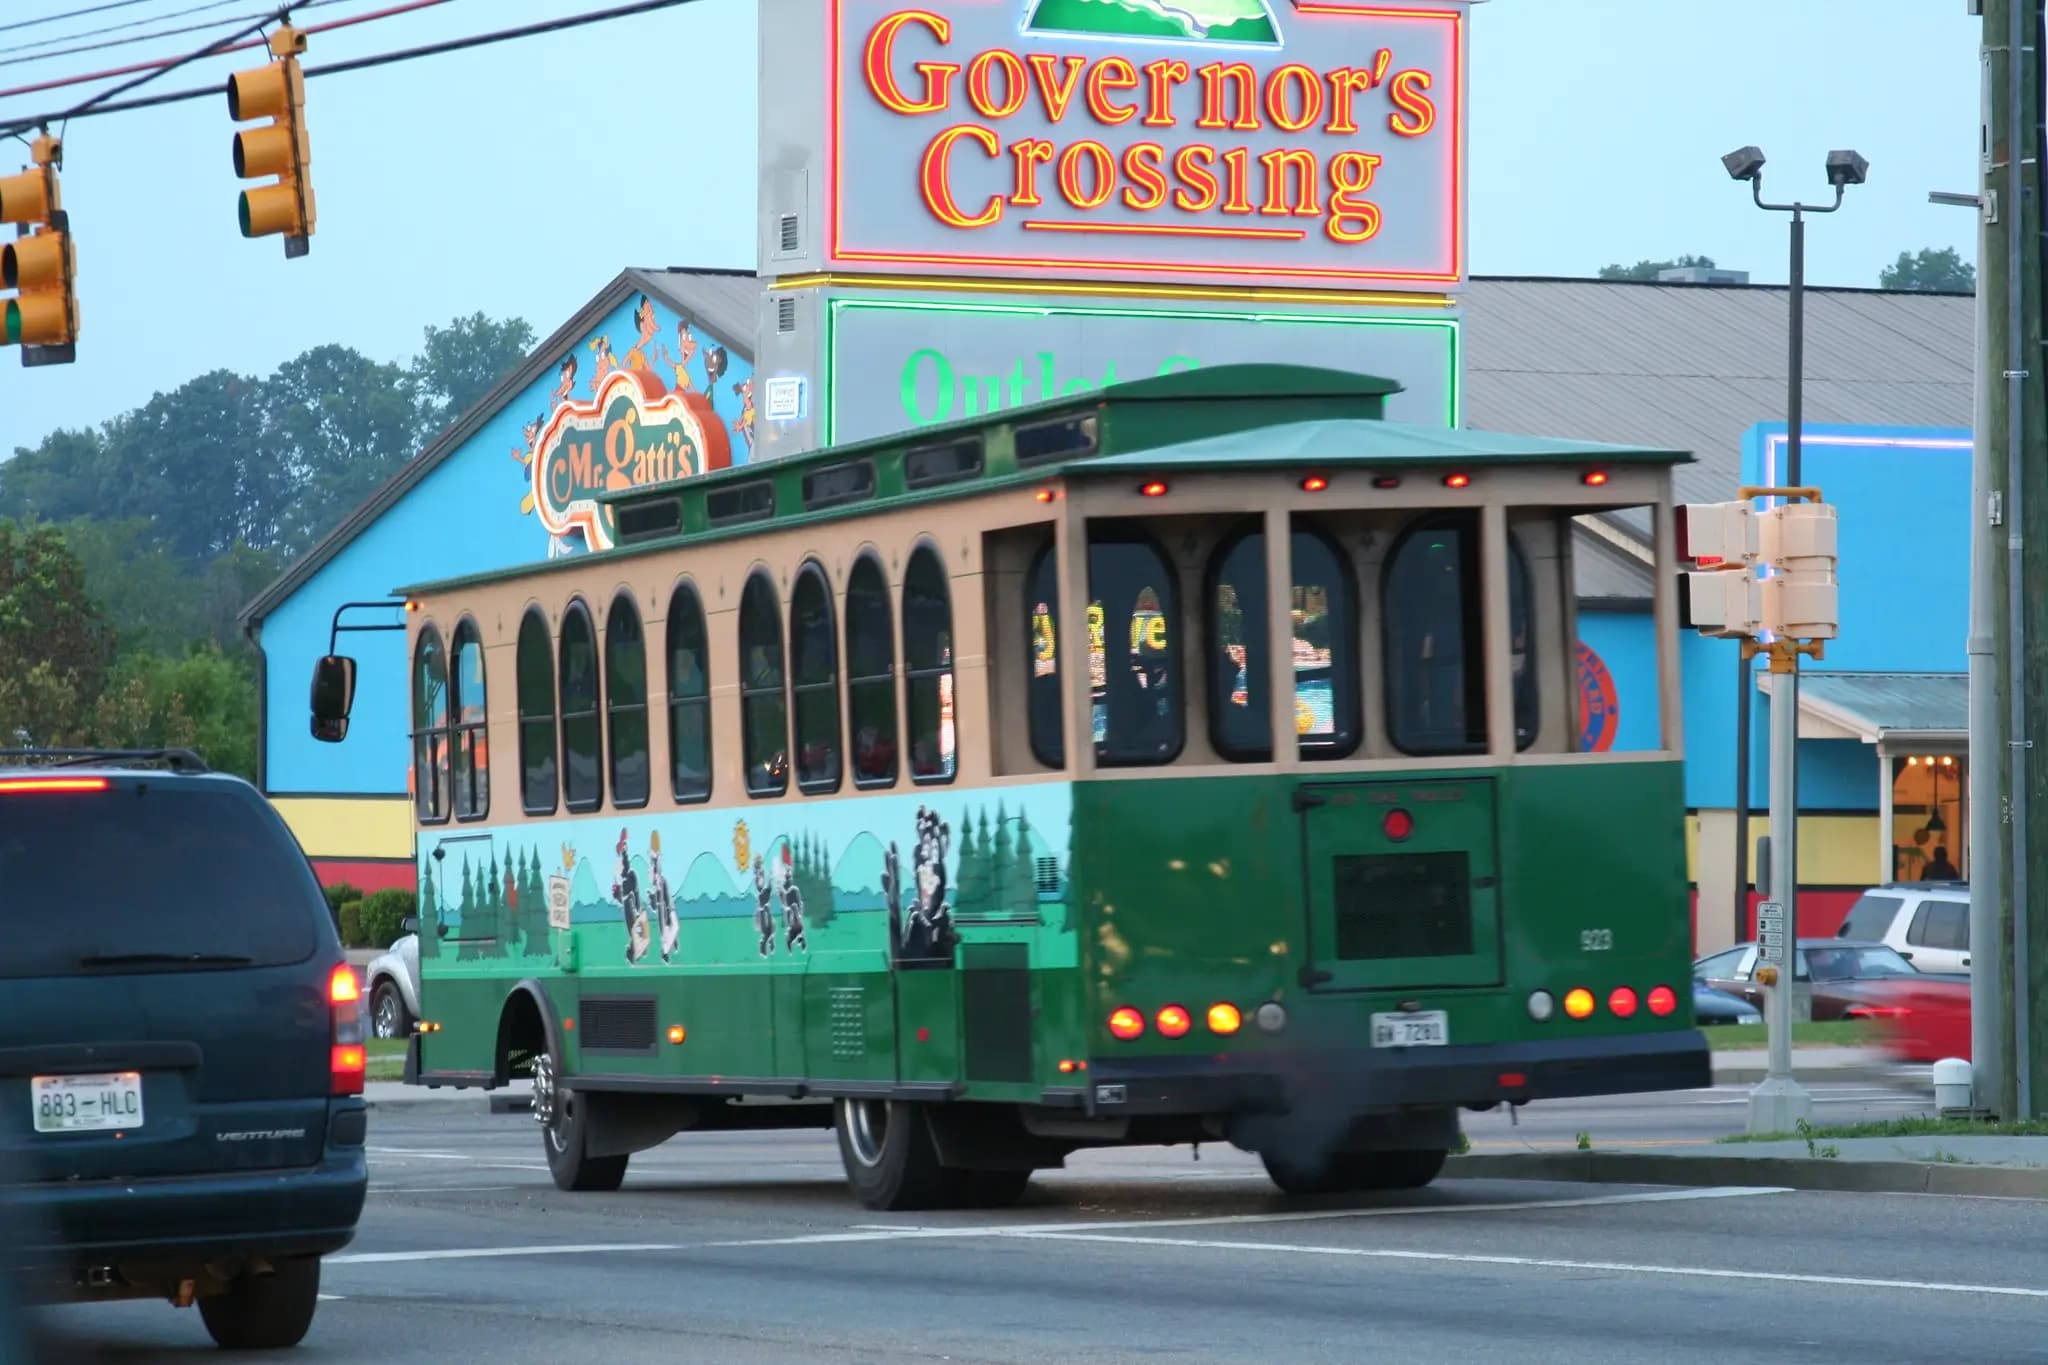 Pigeon Forge Trolley